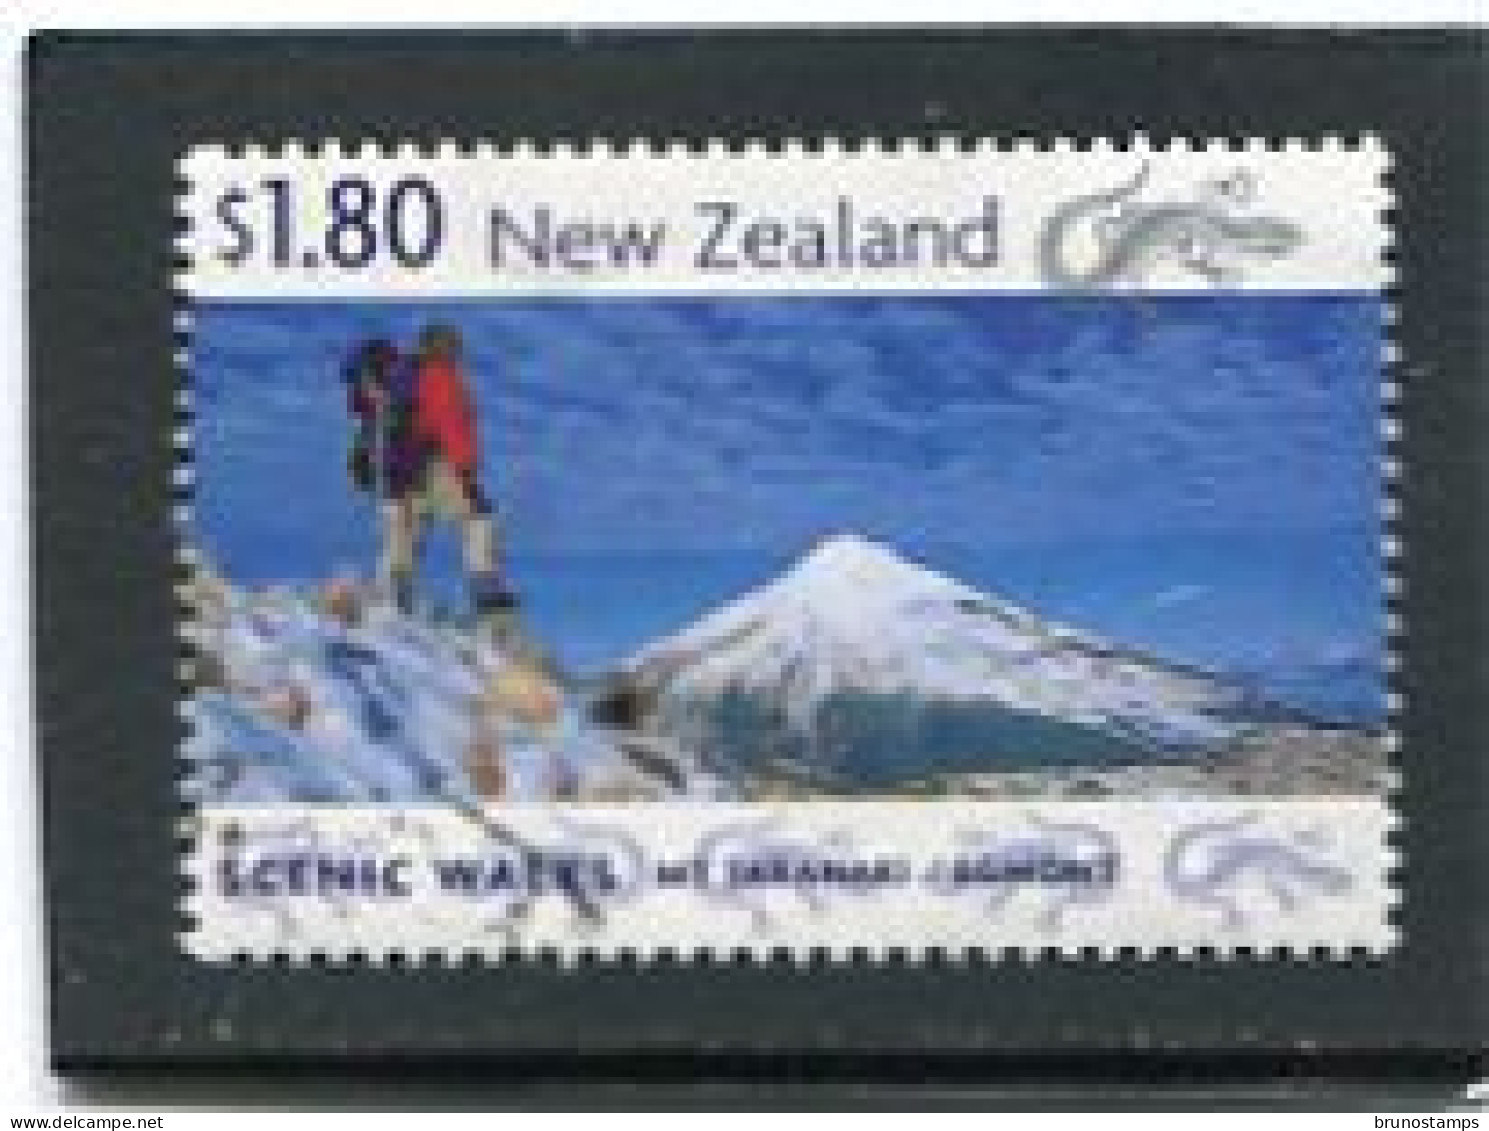 NEW ZEALAND - 1999  1.80$  SCENIC WALKS  FINE  USED - Used Stamps